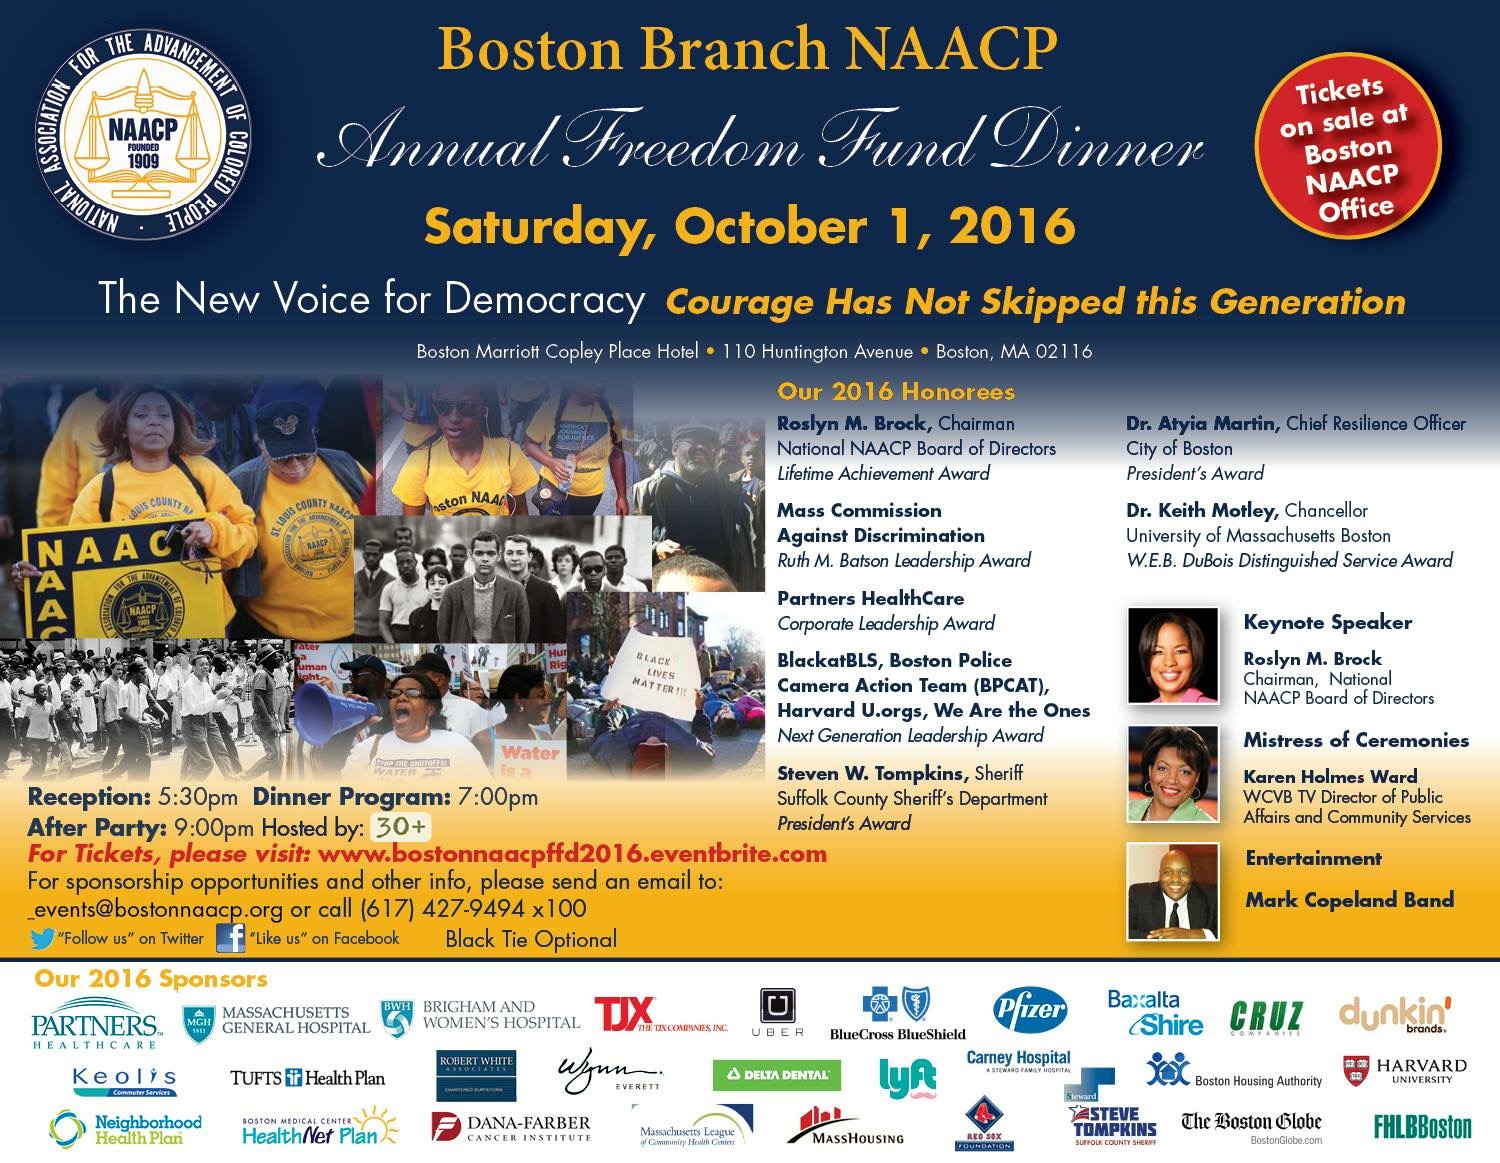 naacp-annual-freedom-fund